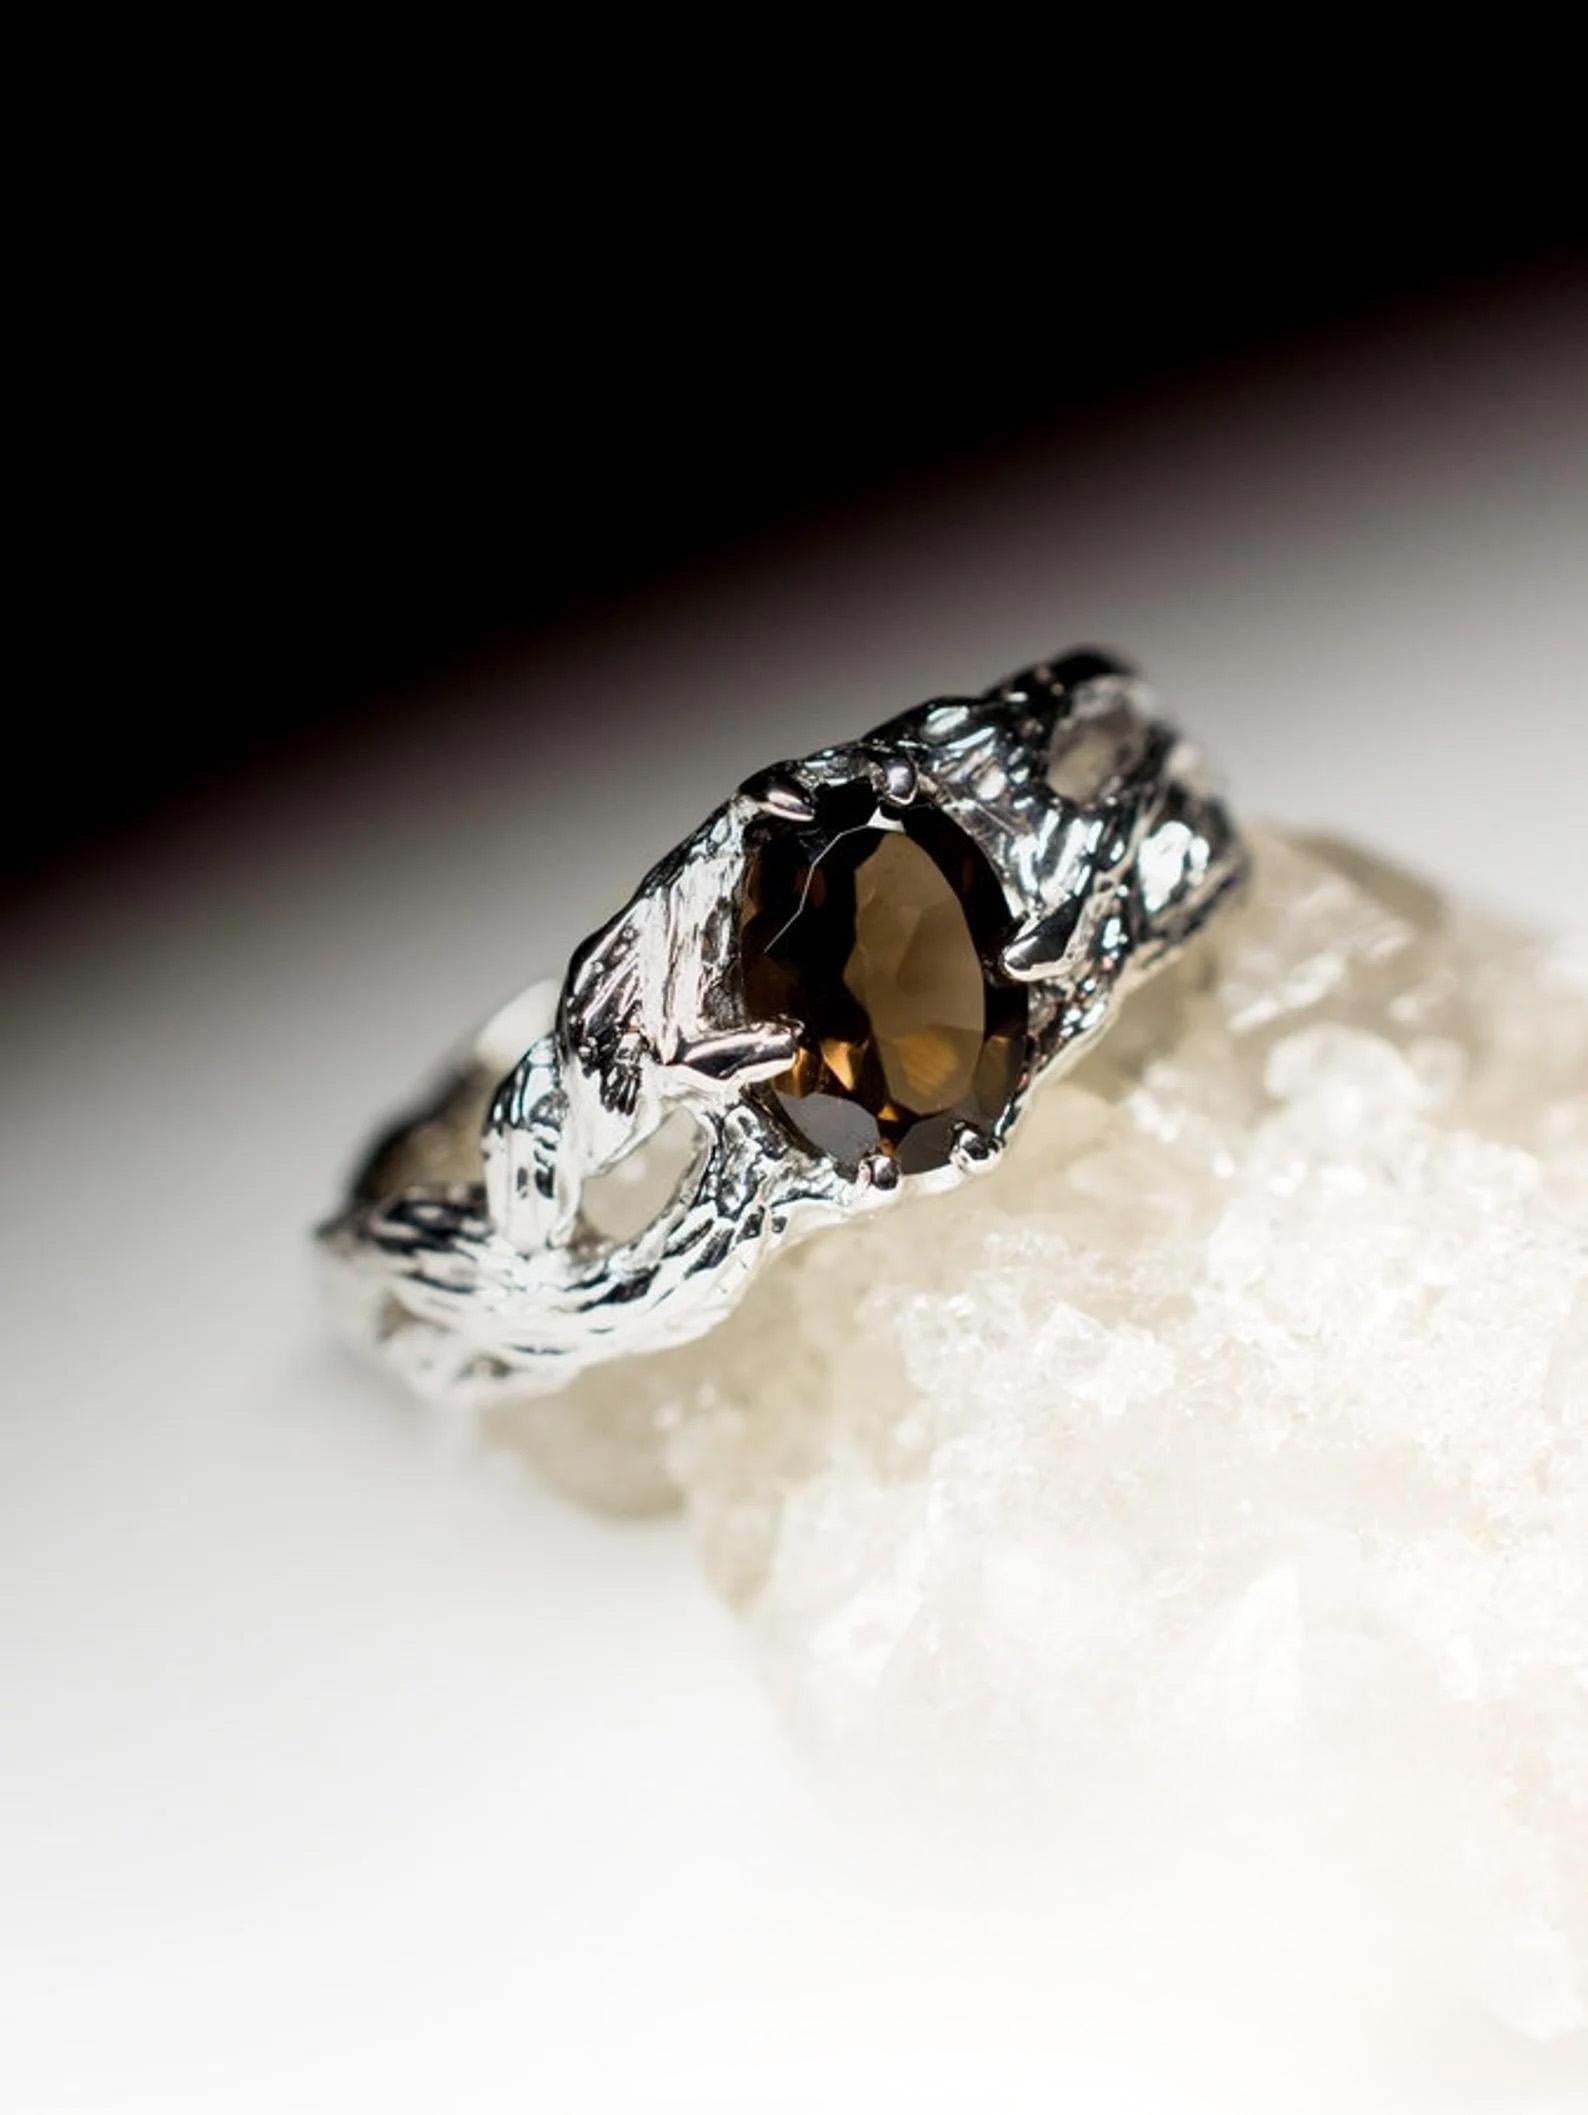 Smoky Quartz Silver Ring Natural Quartz Gemstone Unisex Jewelry Gift For Her Him In New Condition For Sale In Berlin, DE